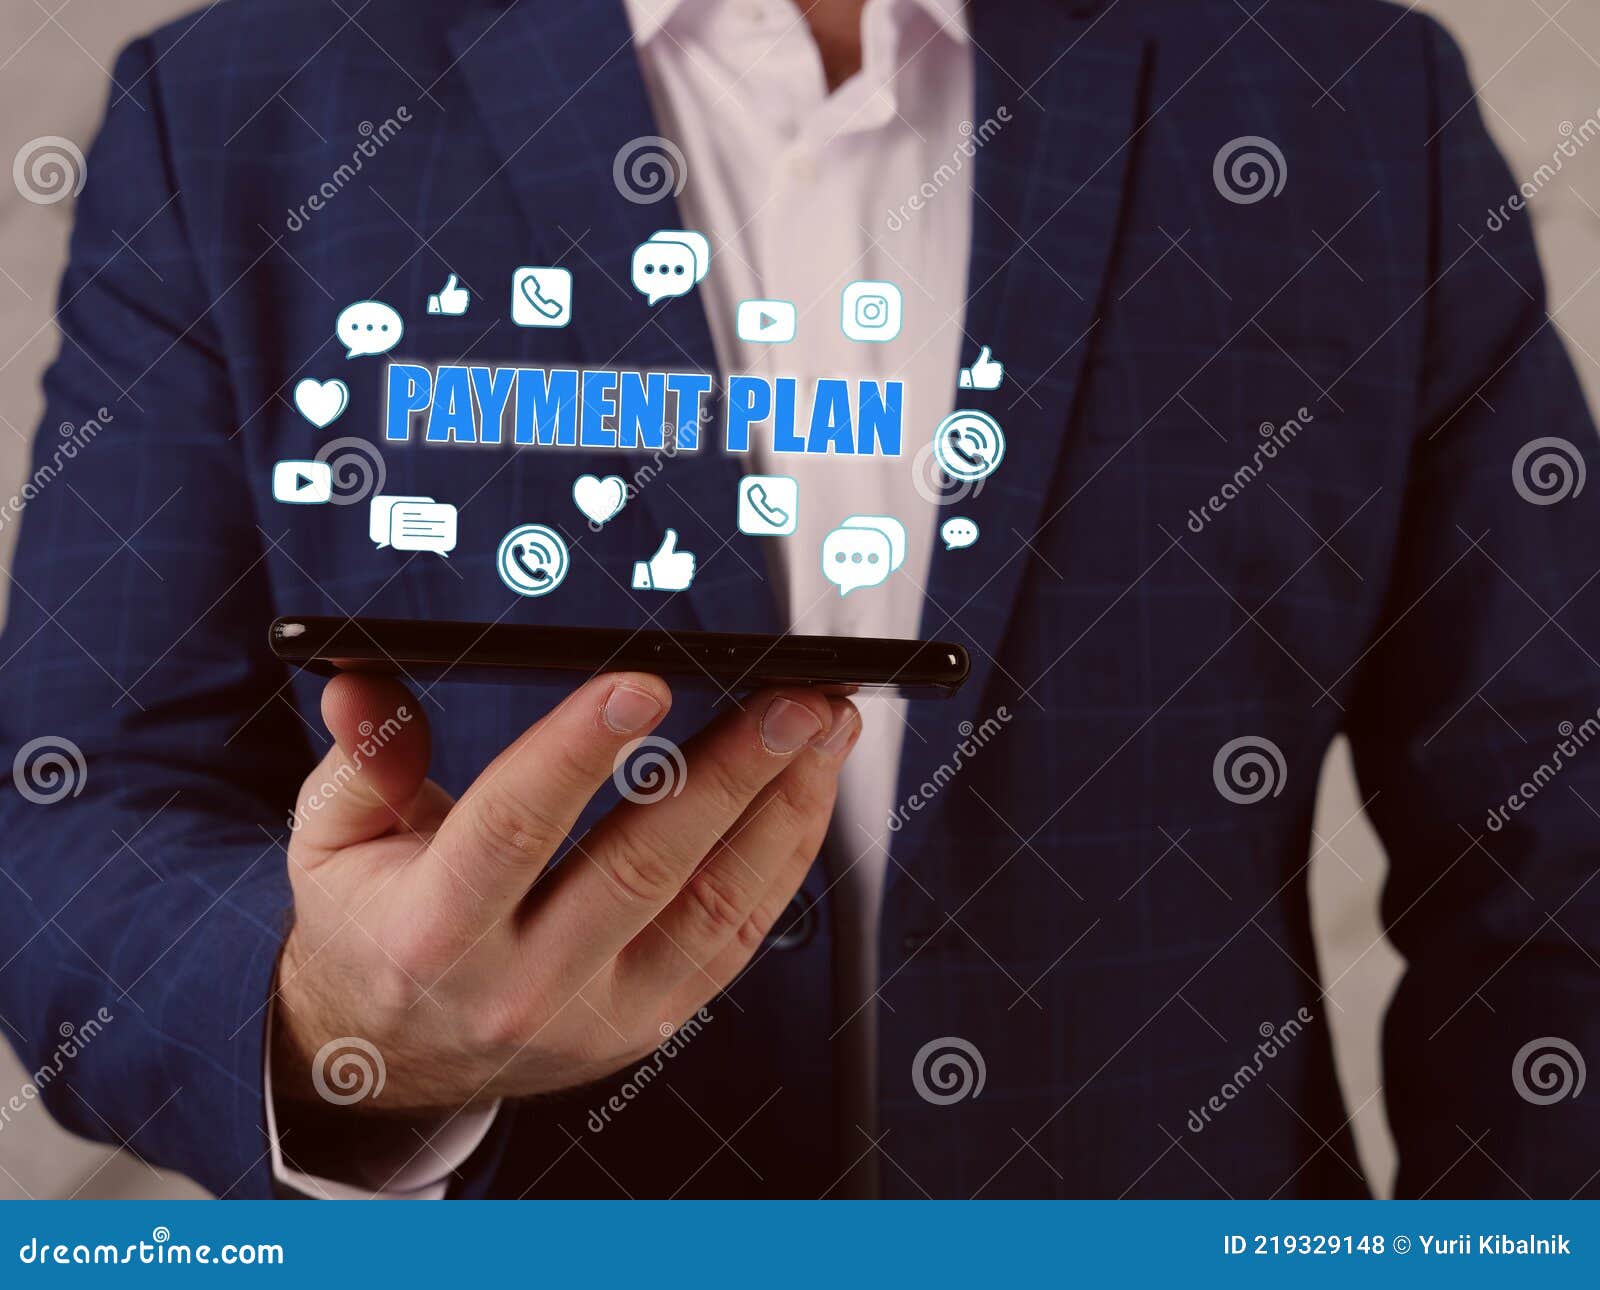 payment plan text in search line. businessman looking at smartphone. aÃÂ termÃÂ payment planÃÂ involves receiving equal monthlyÃÂ 